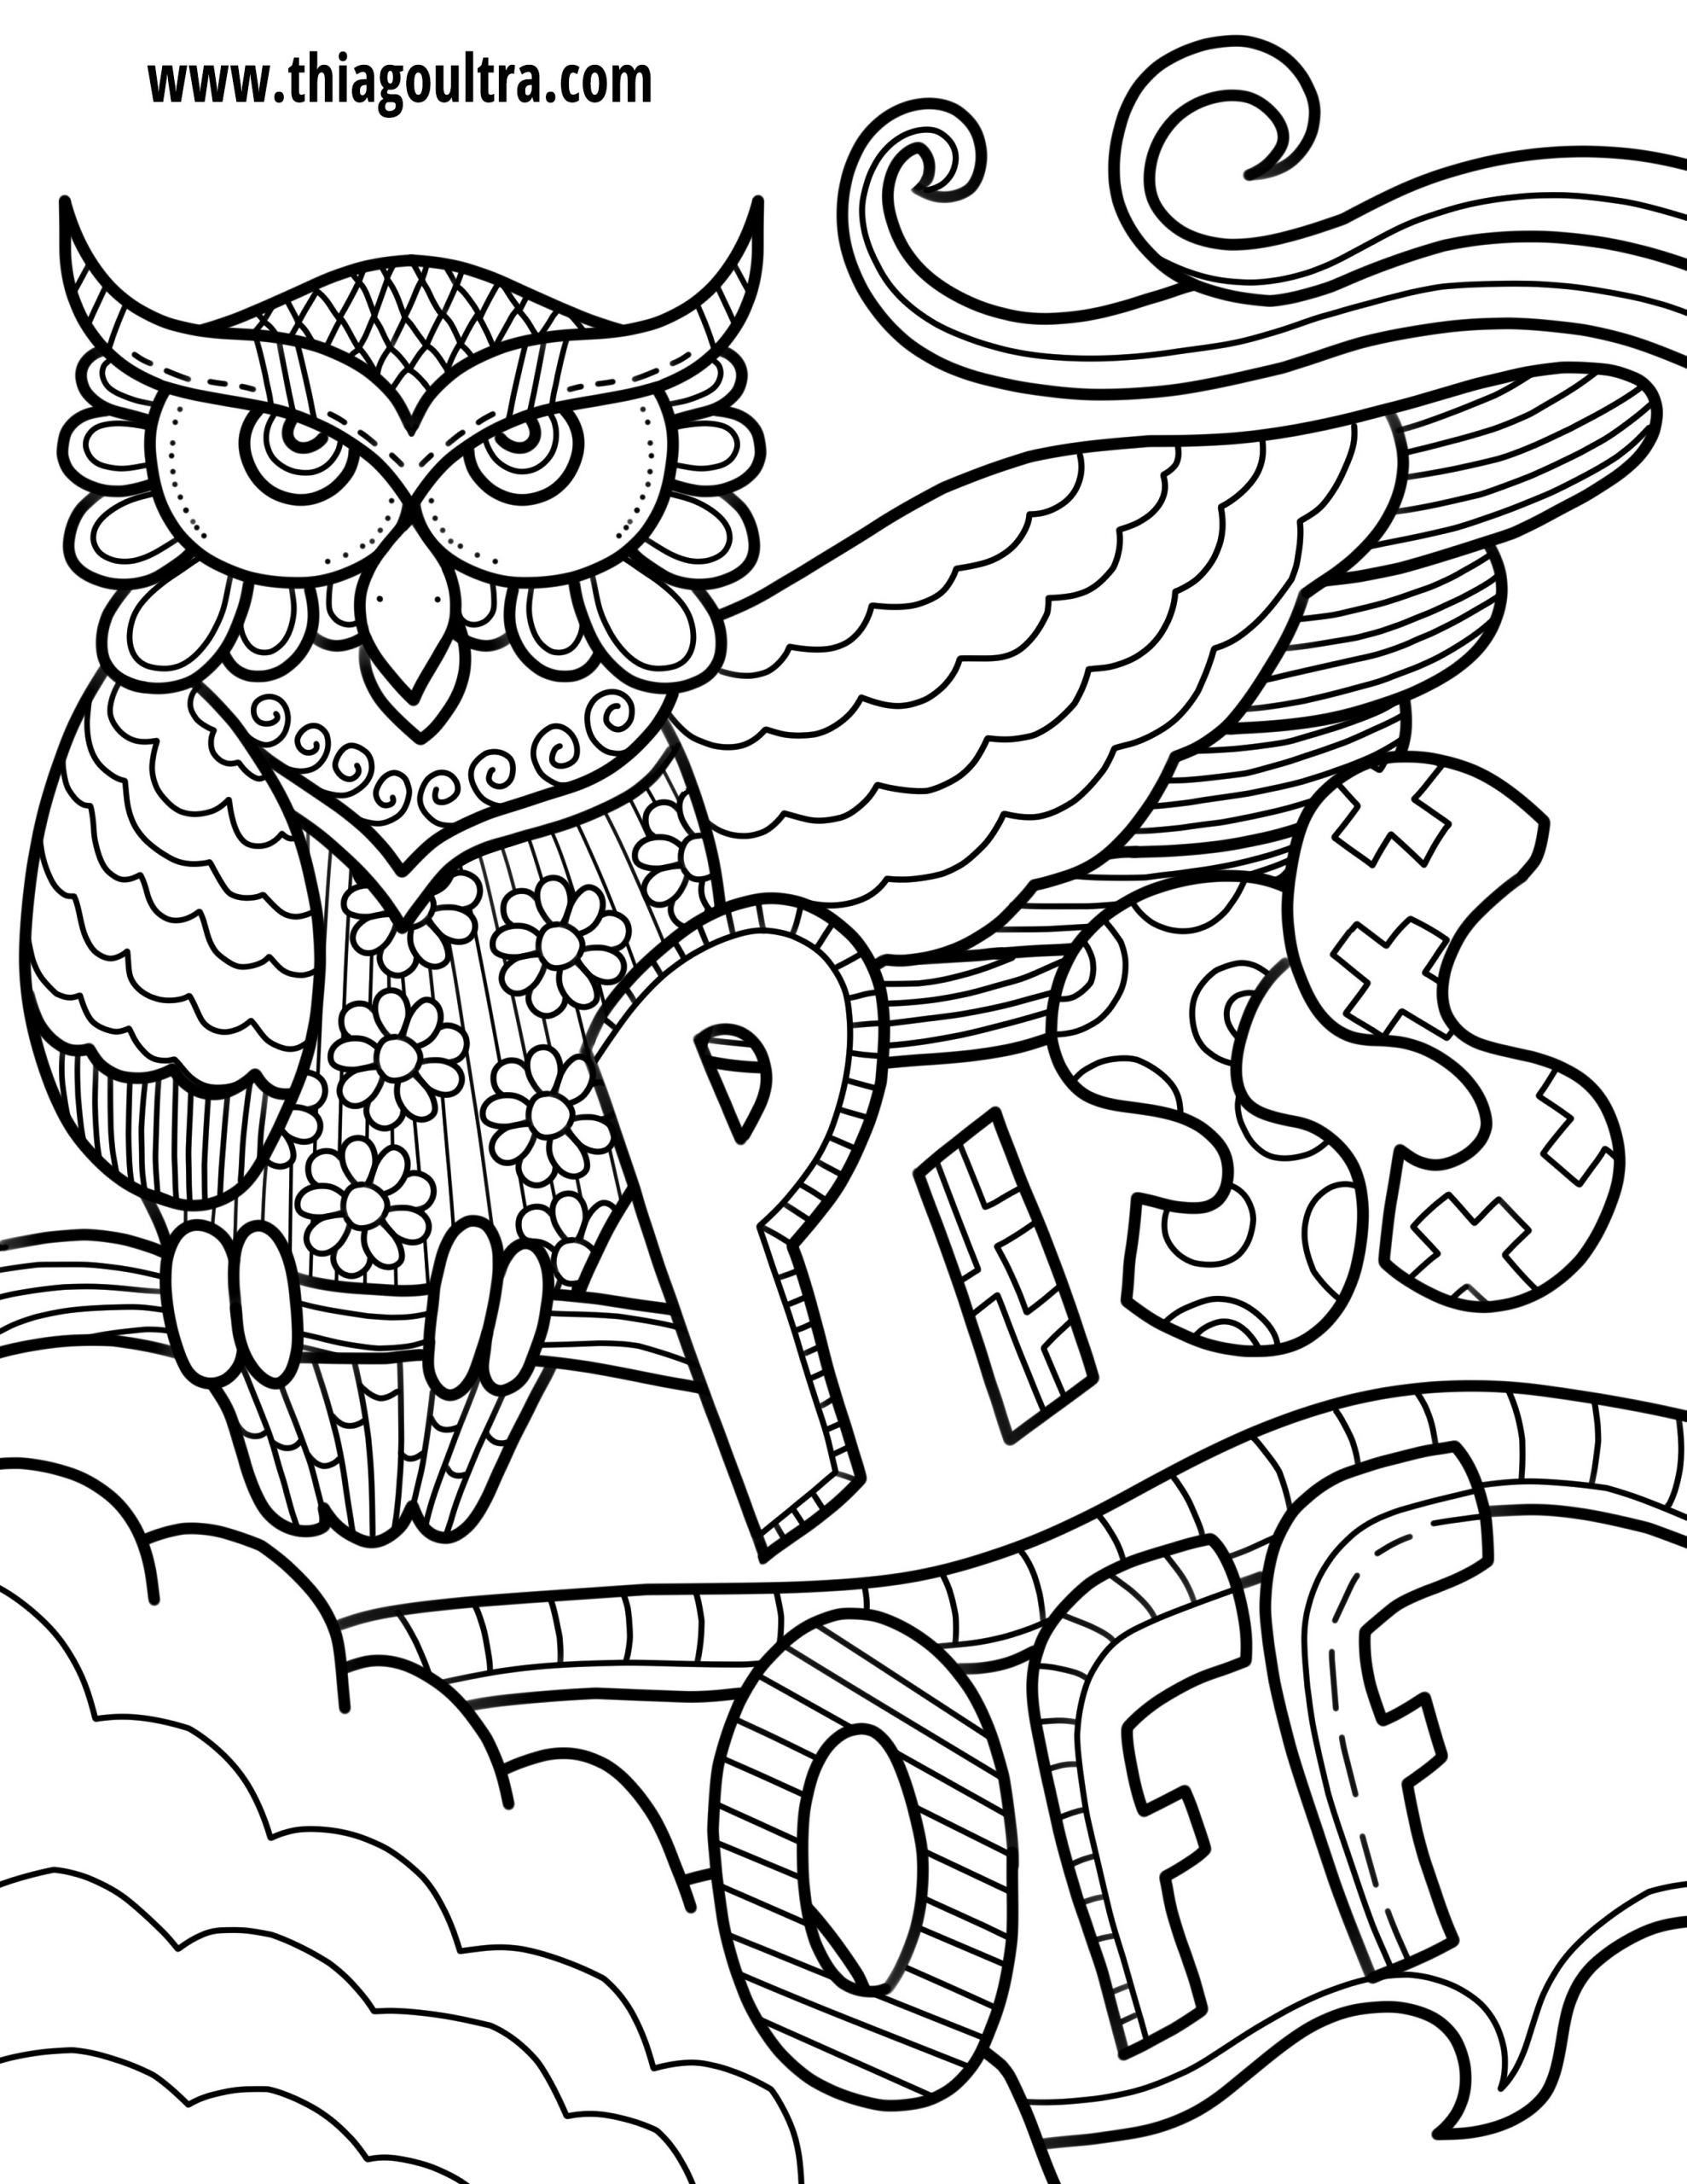 Free Printable Swear Word Coloring Pages
 Printable Swear Word Coloring Pages Free